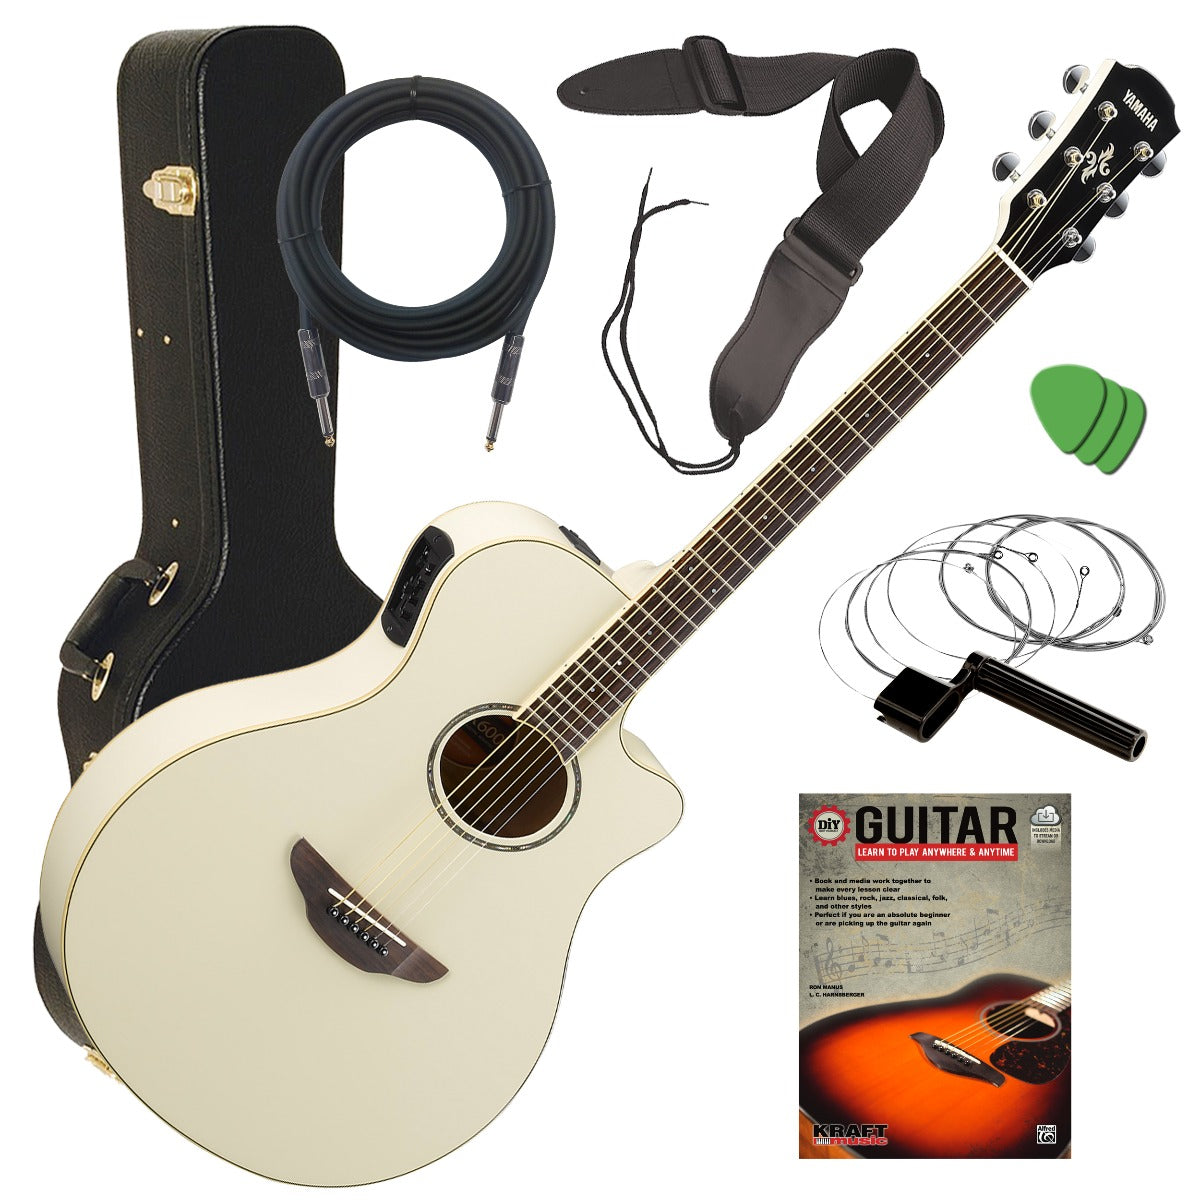 Yamaha APX600 Acoustic Electric Guitar – Vintage White